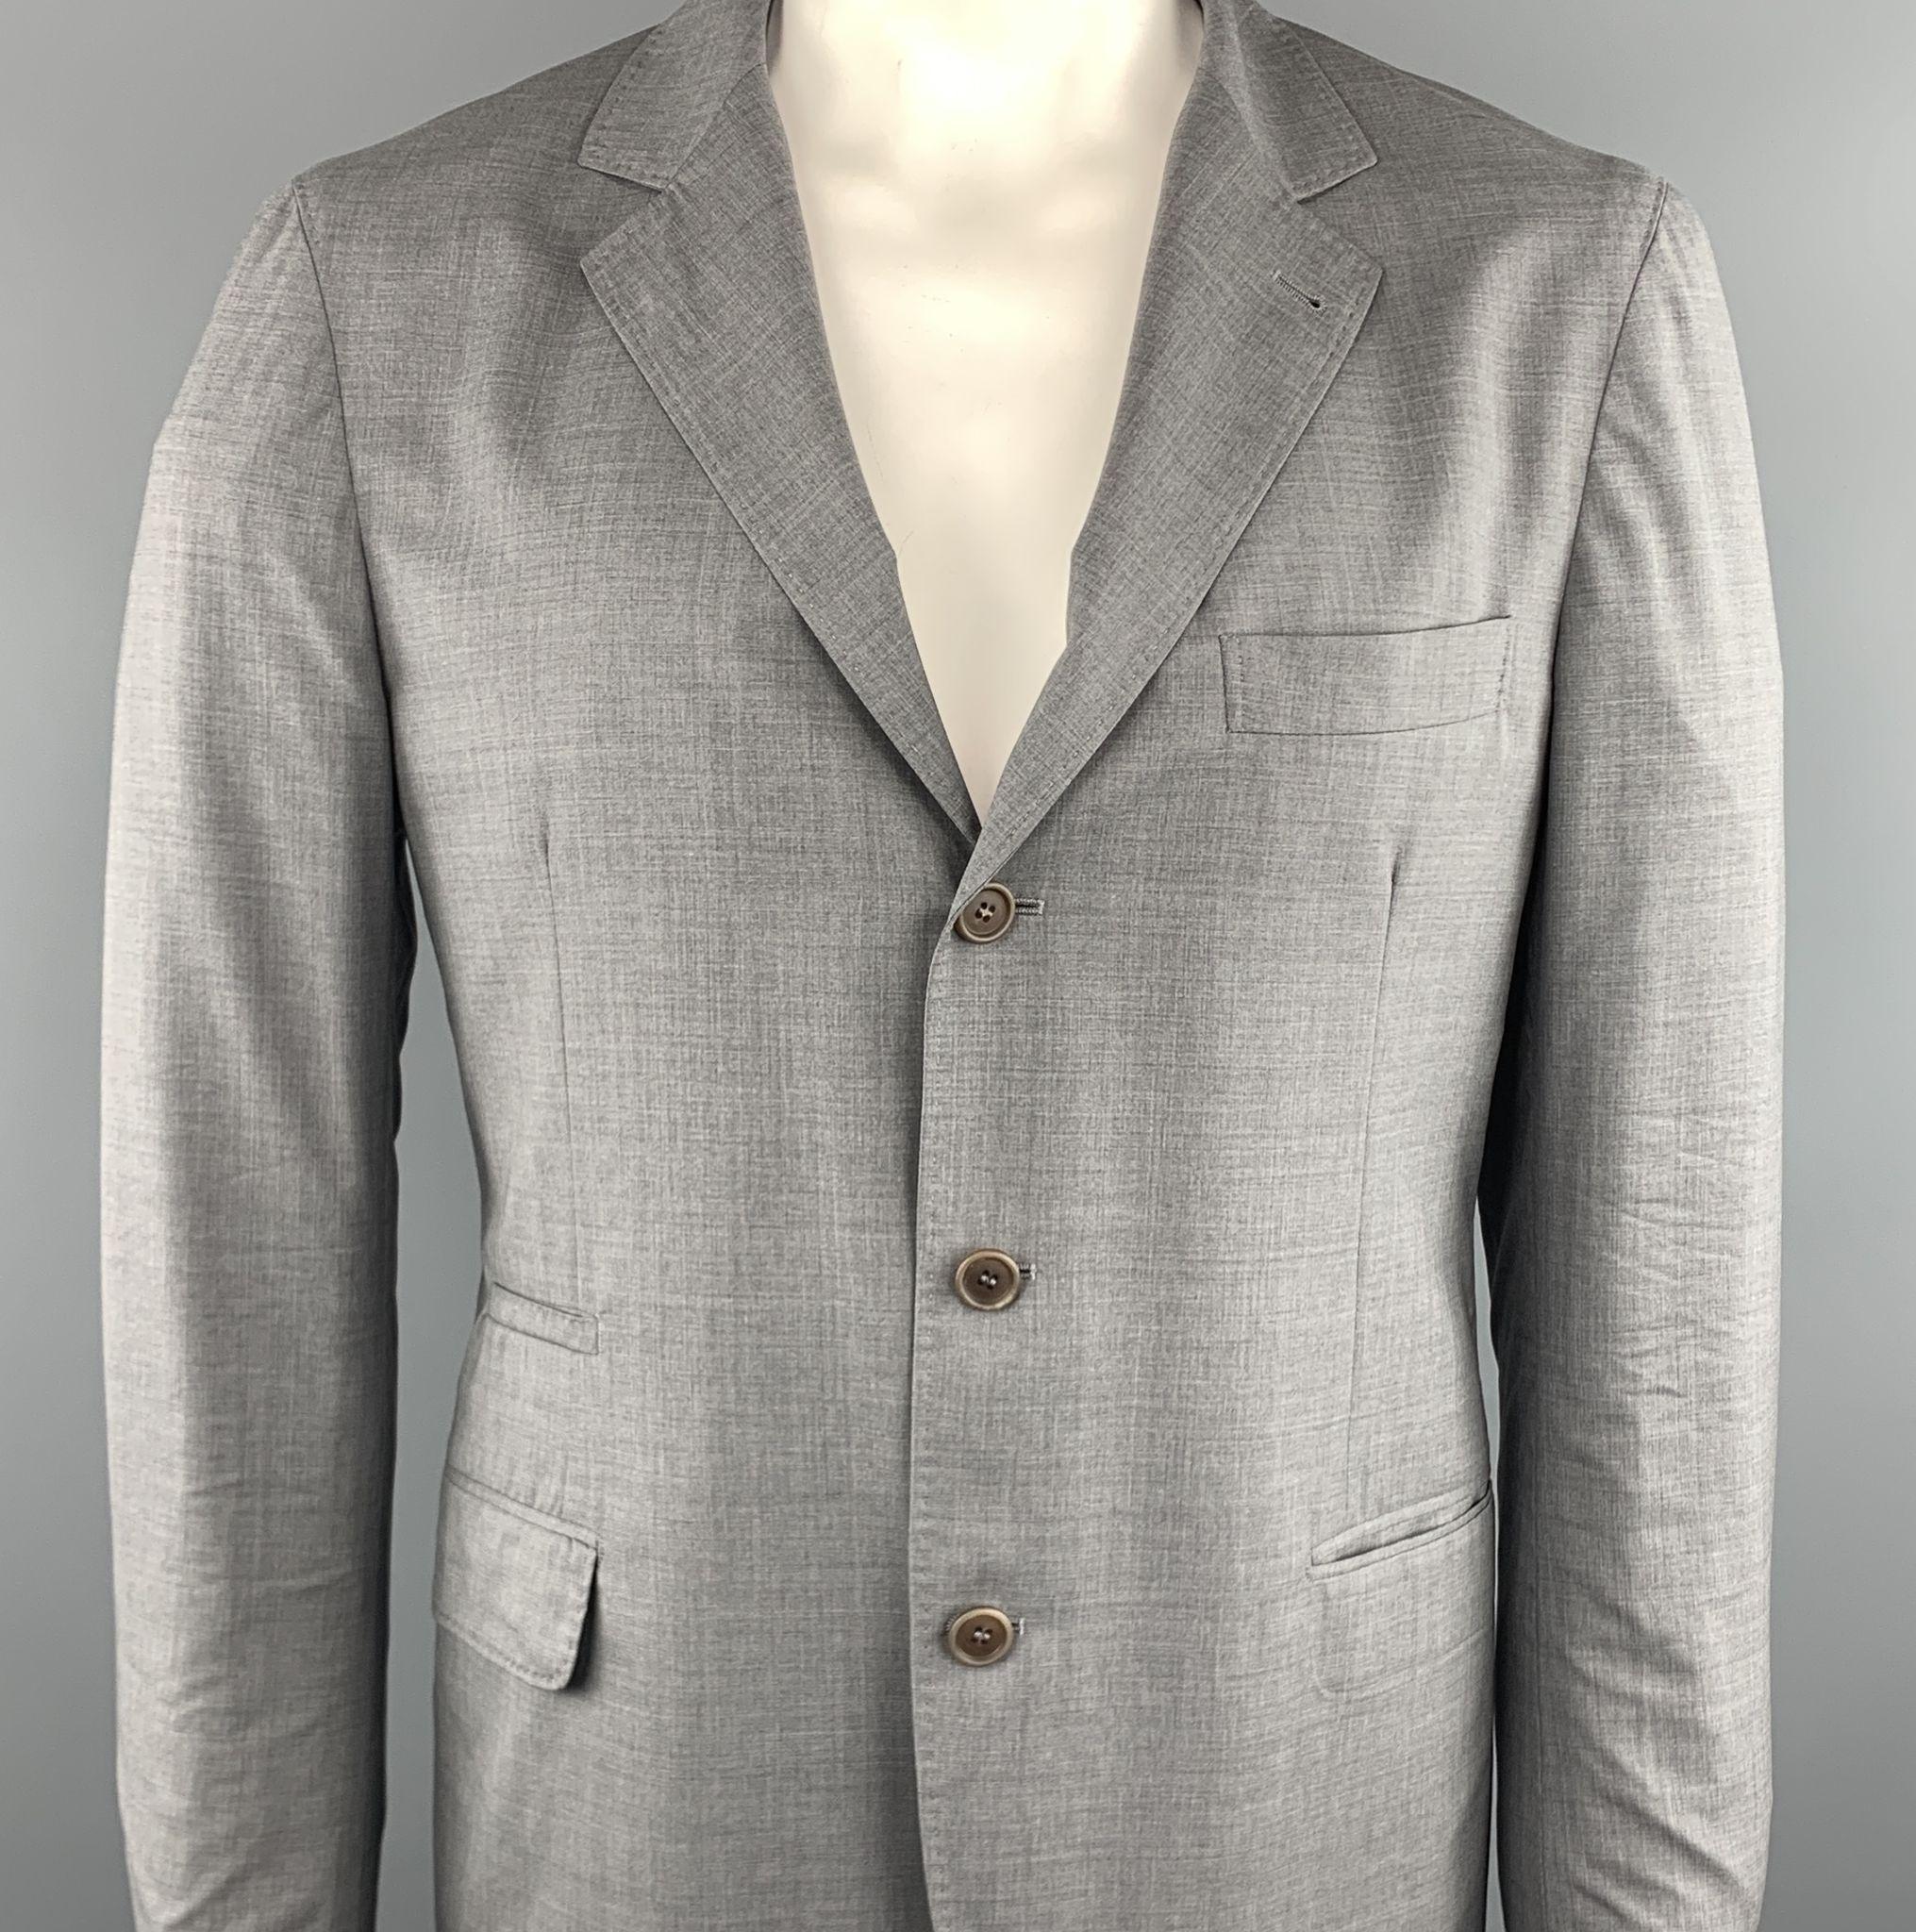 BRUNELLO CUCINELLI sport coat comes in a gray wool and silk featuring a notch lapel style, three buttoned closure, and flap pockets. Made in Italy.
 
Excellent Pre-Owned Condition.
Marked: 54
 
Measurements:
 
Shoulder: 19 in.
Chest: 39 in.
Sleeve: